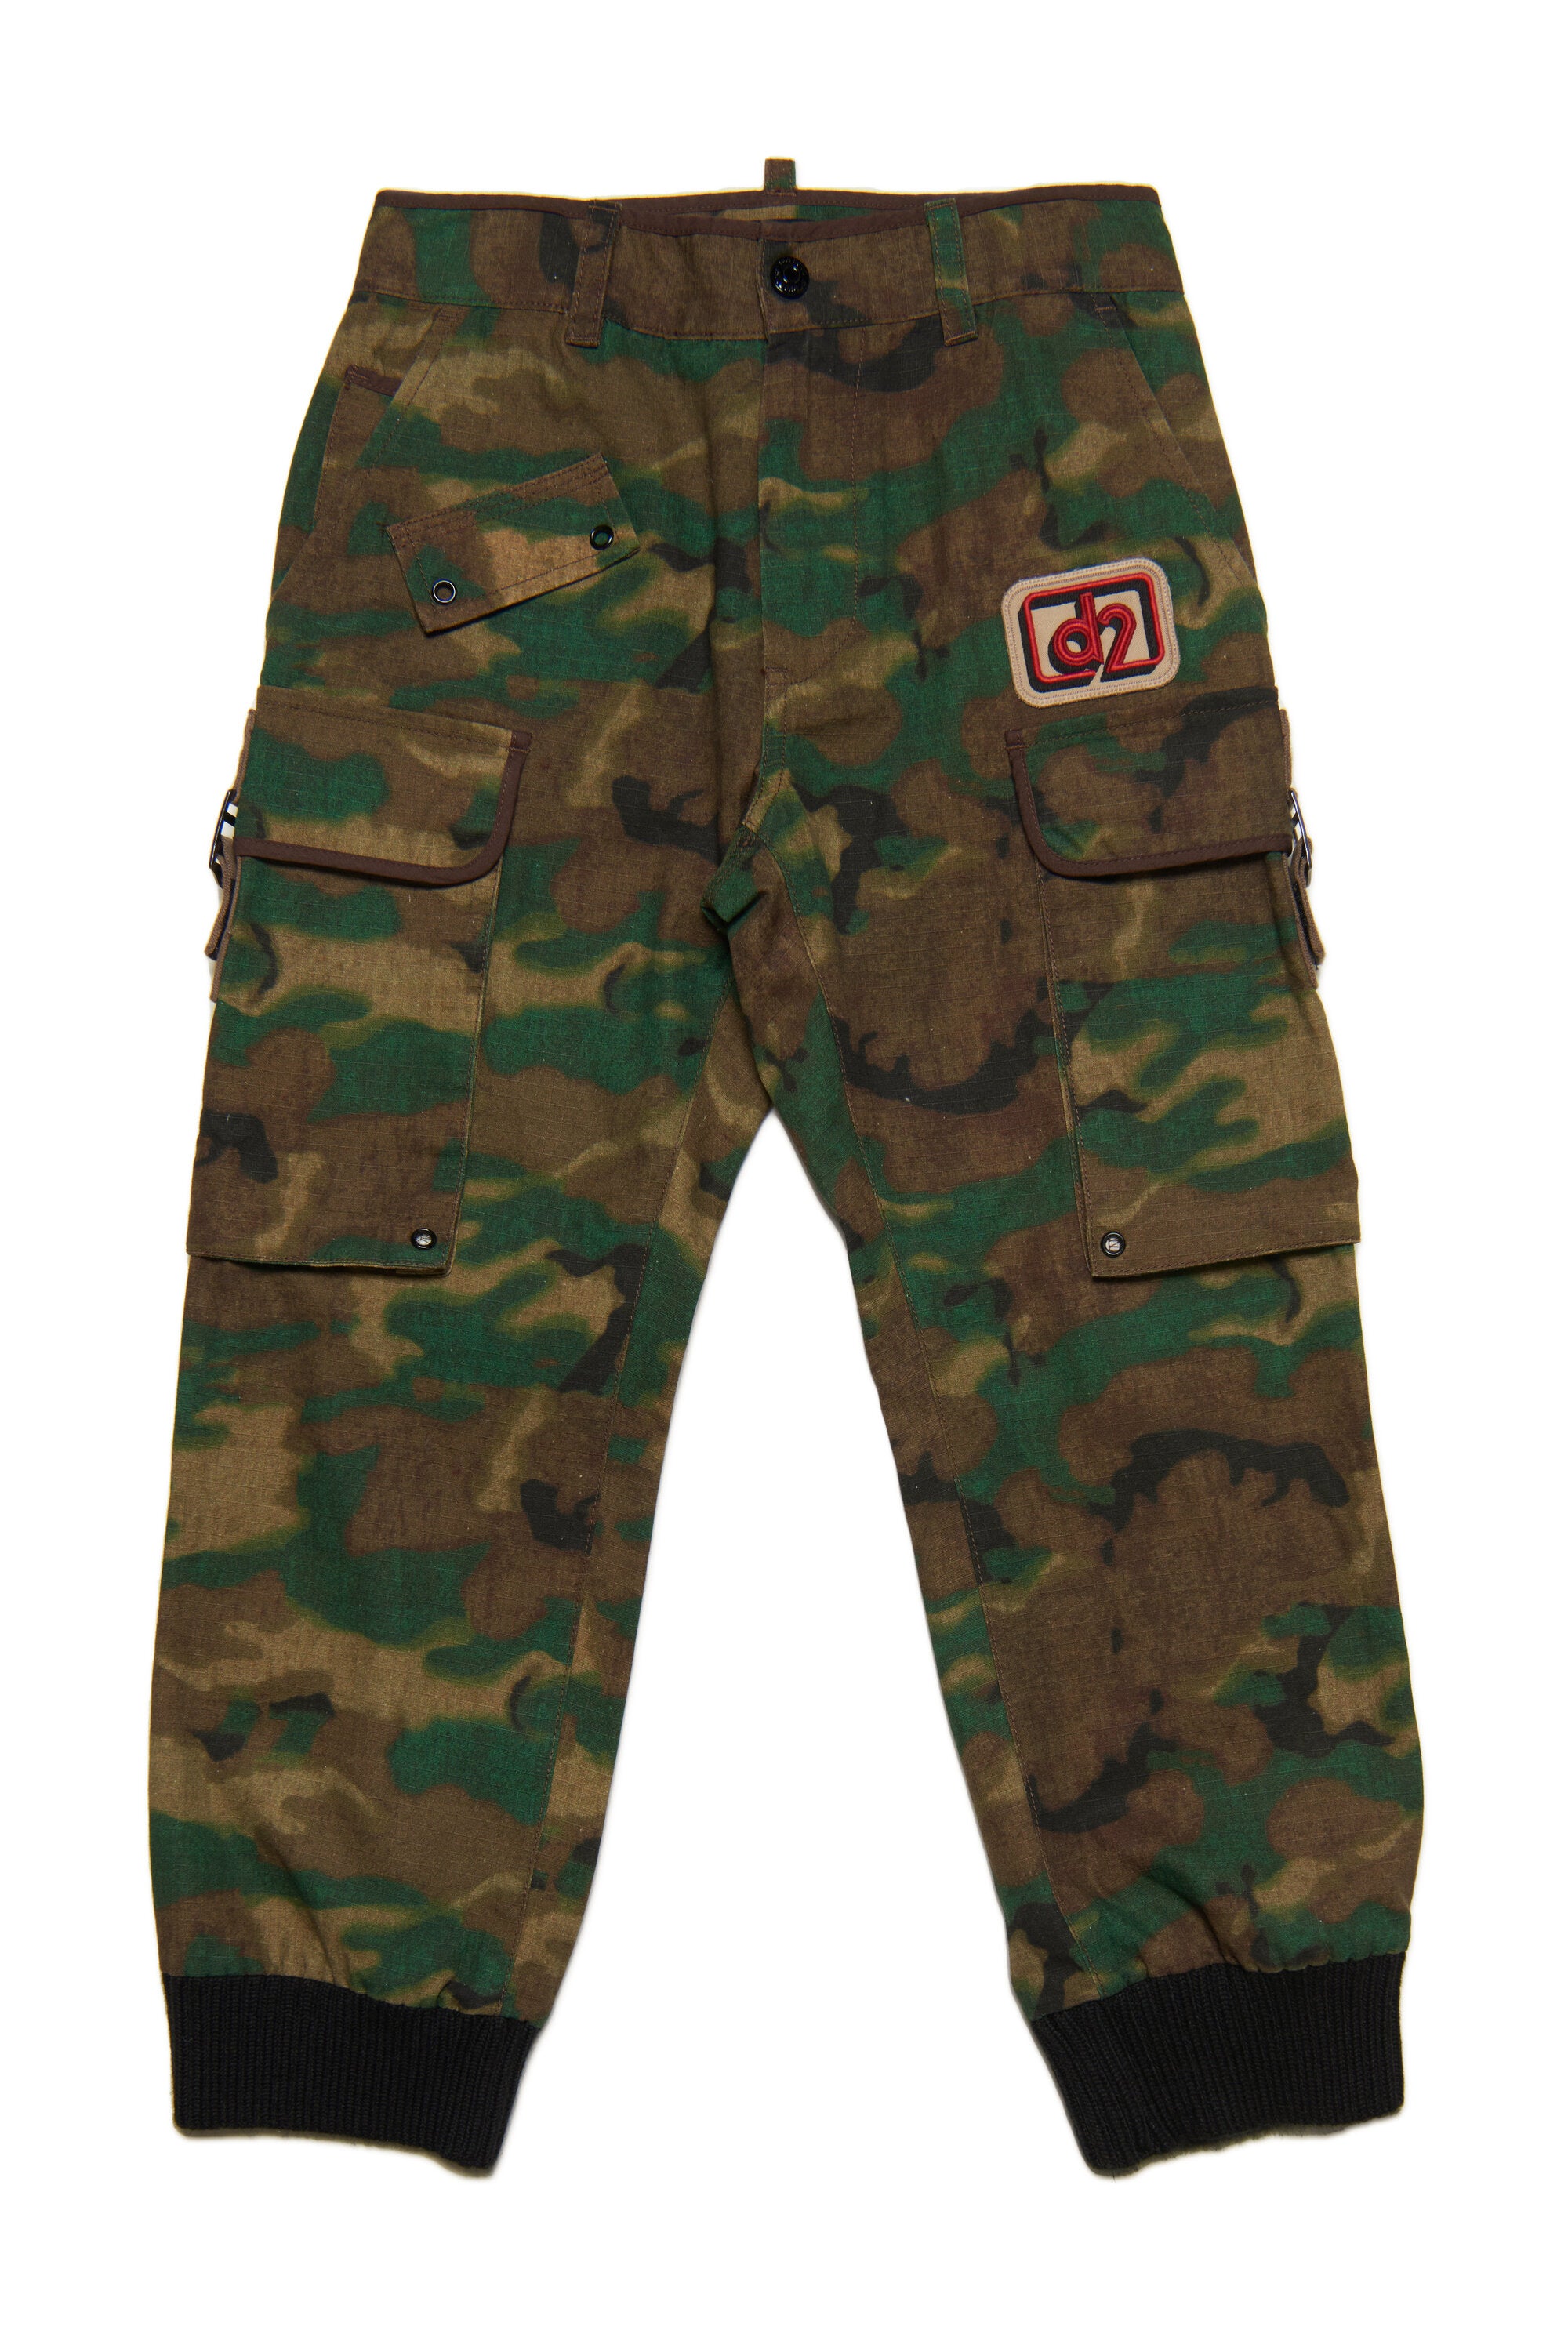 Cotton ripstop allover camouflage cargo pants